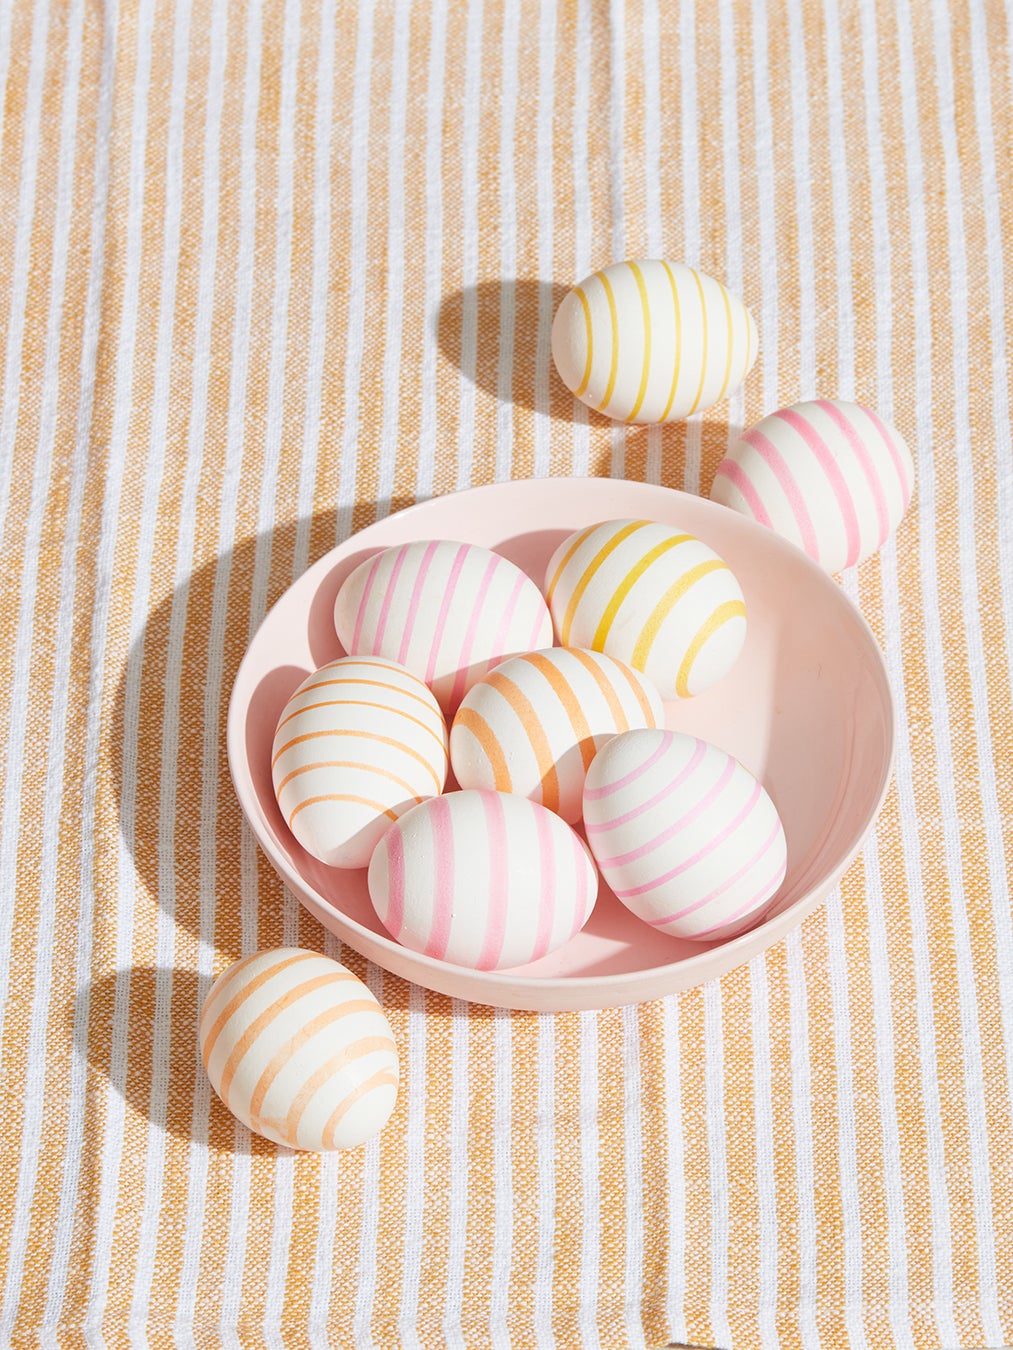 Striped Easter eggs in a bowl